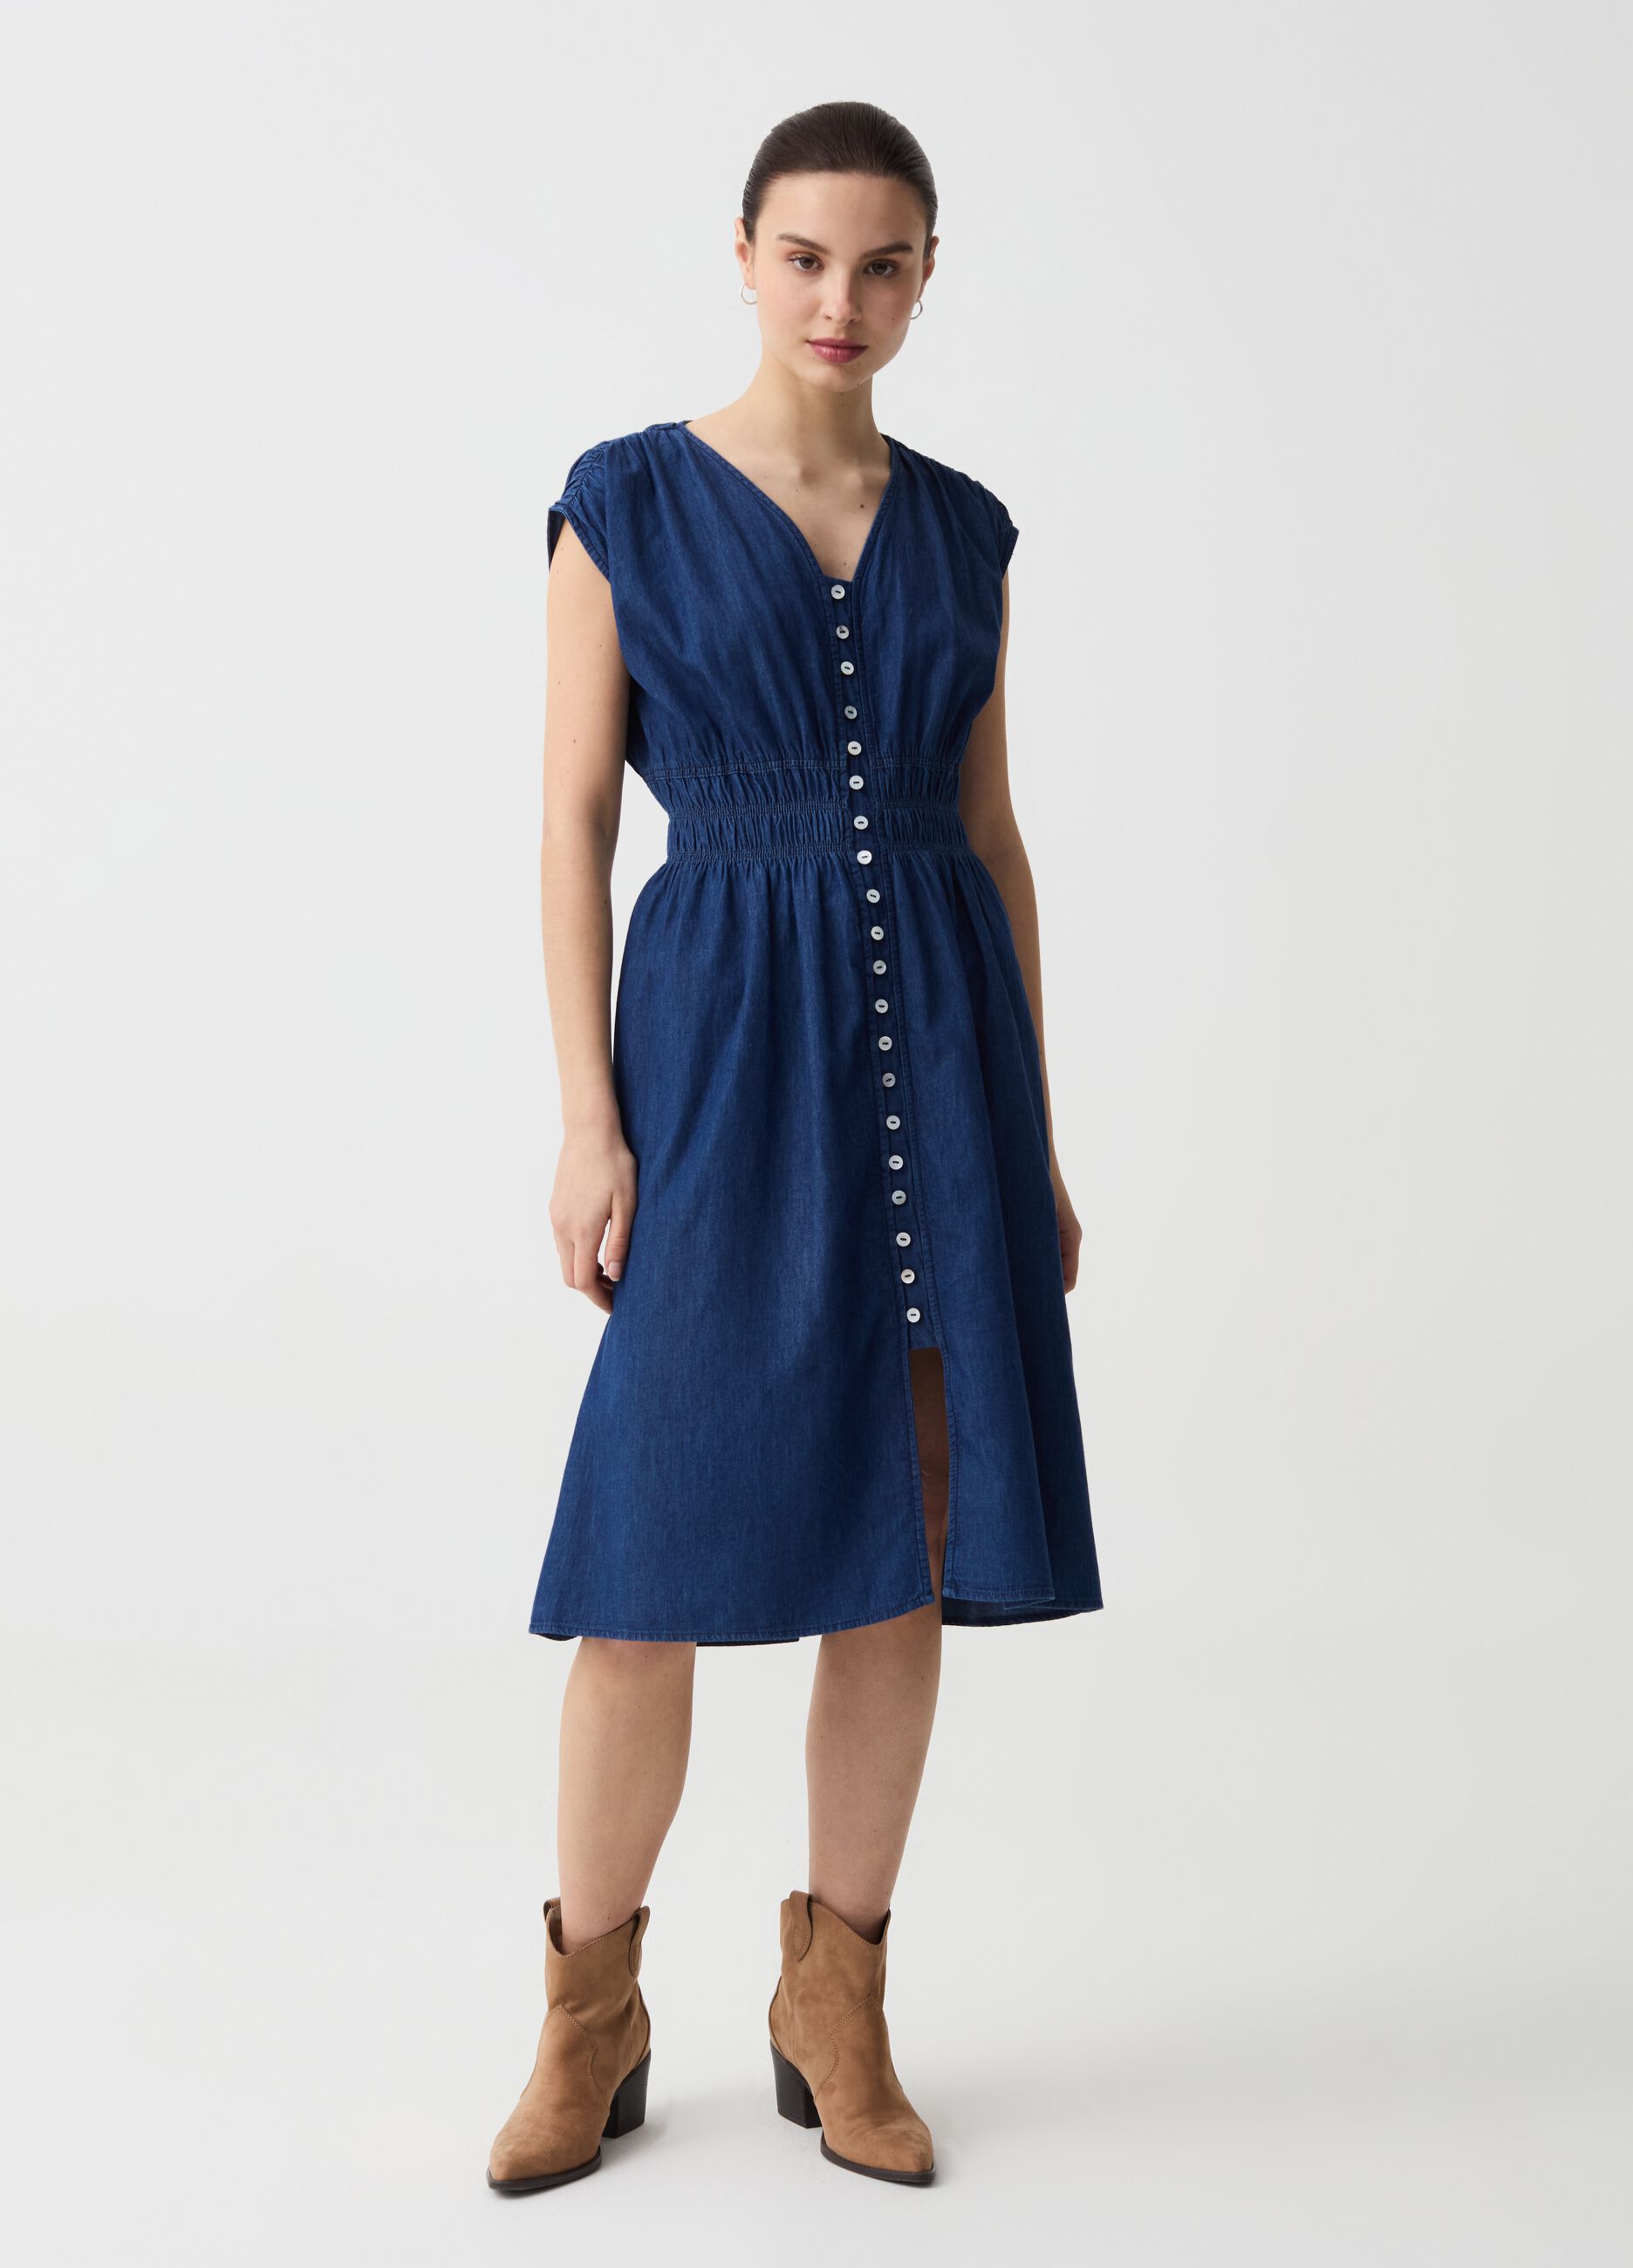 Denim midi dress with small buttons